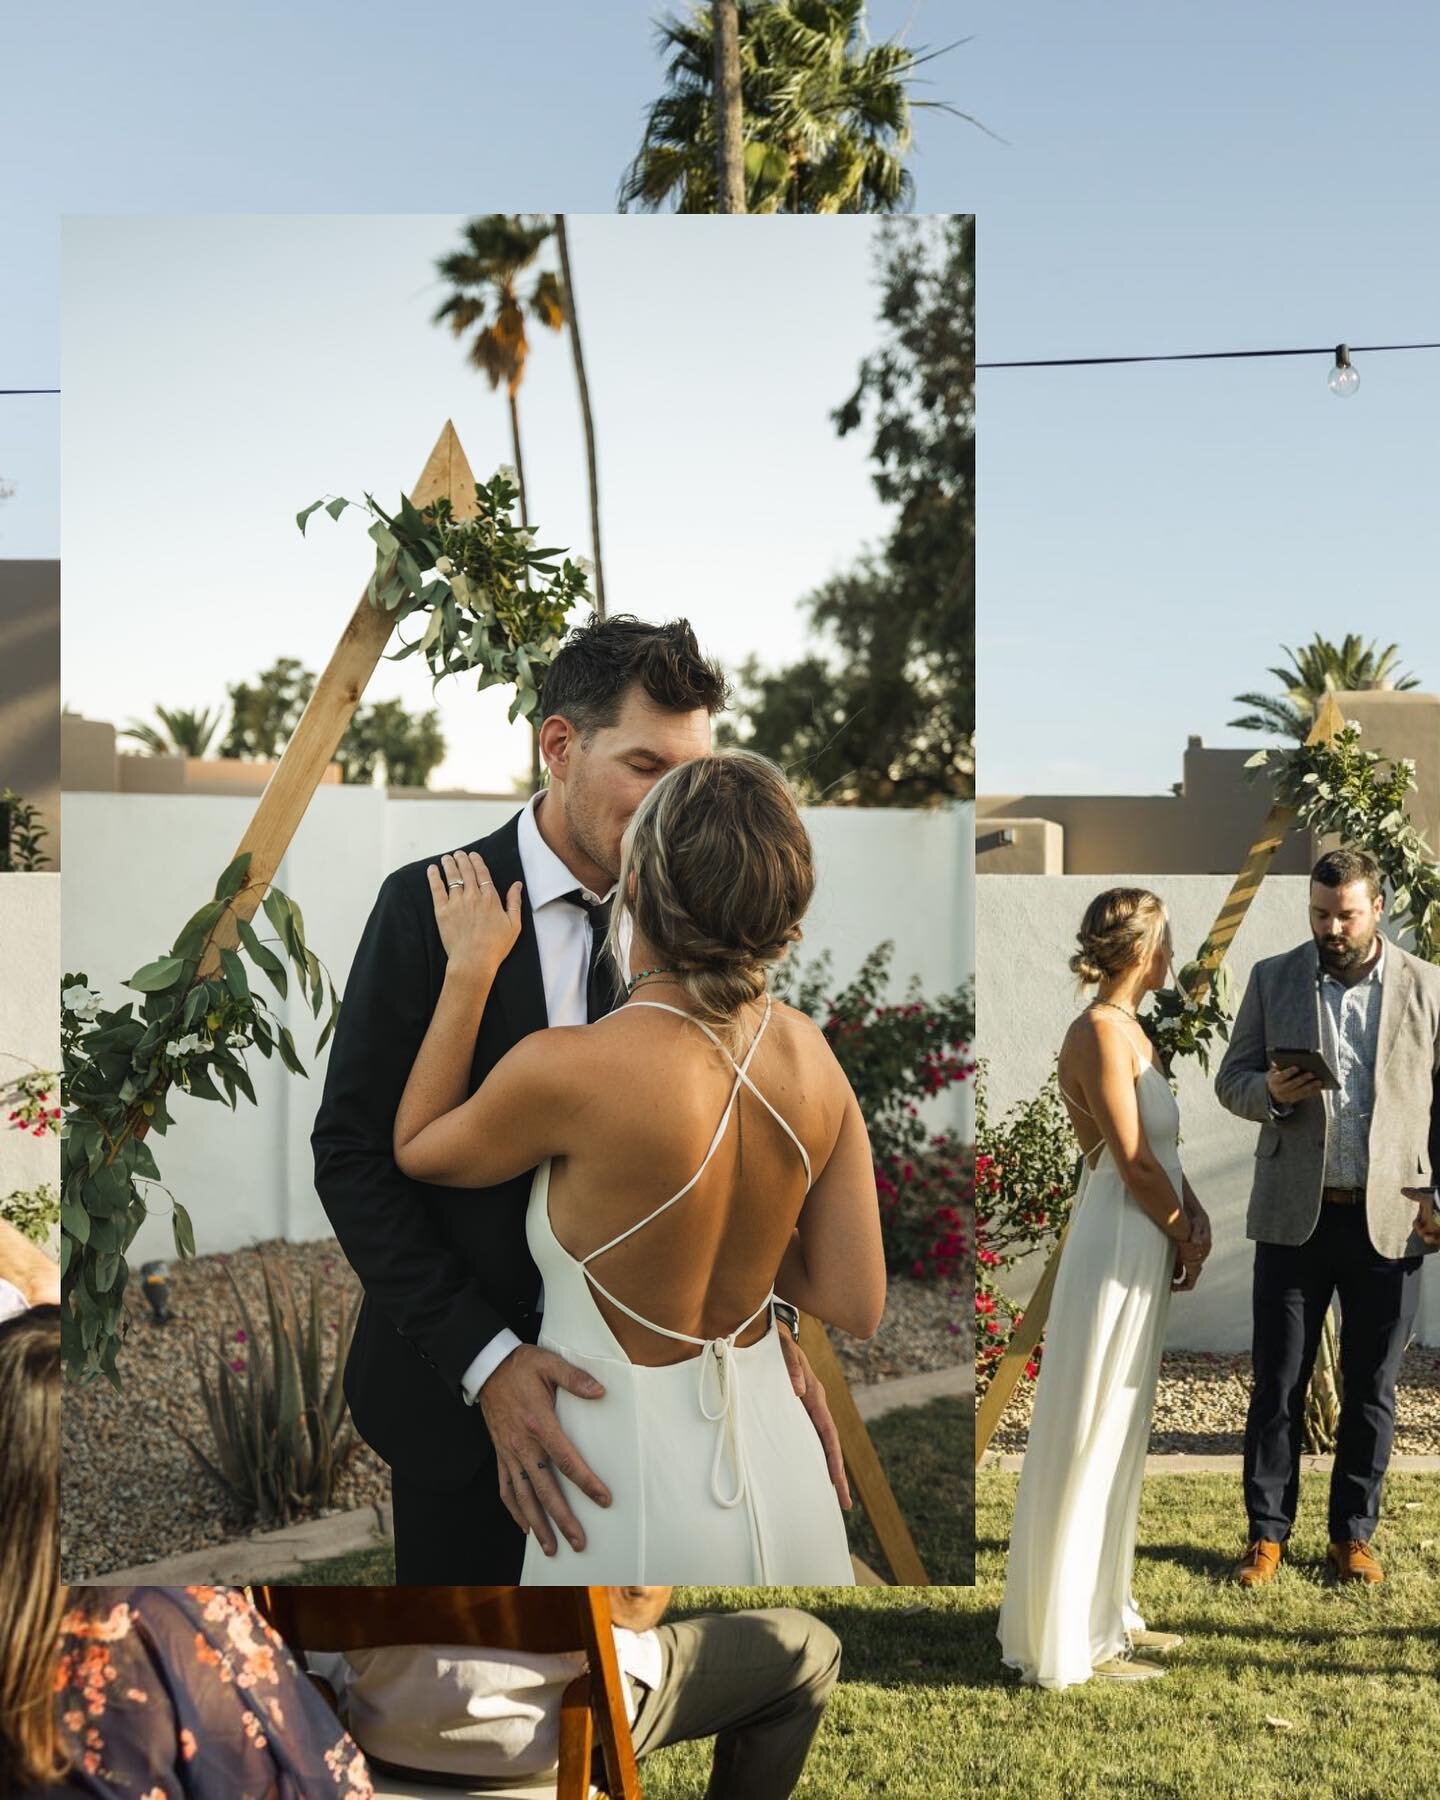 In honor of their 1 year anniversary being yesterday, figured I would share some photos from this awesome backyard wedding🤩 @audrey_lisauskas @danny_lisauskas 

#arizonaweddingphotography #arizonaweddingphotographer #arizonaweddingvideo #arizonawedd